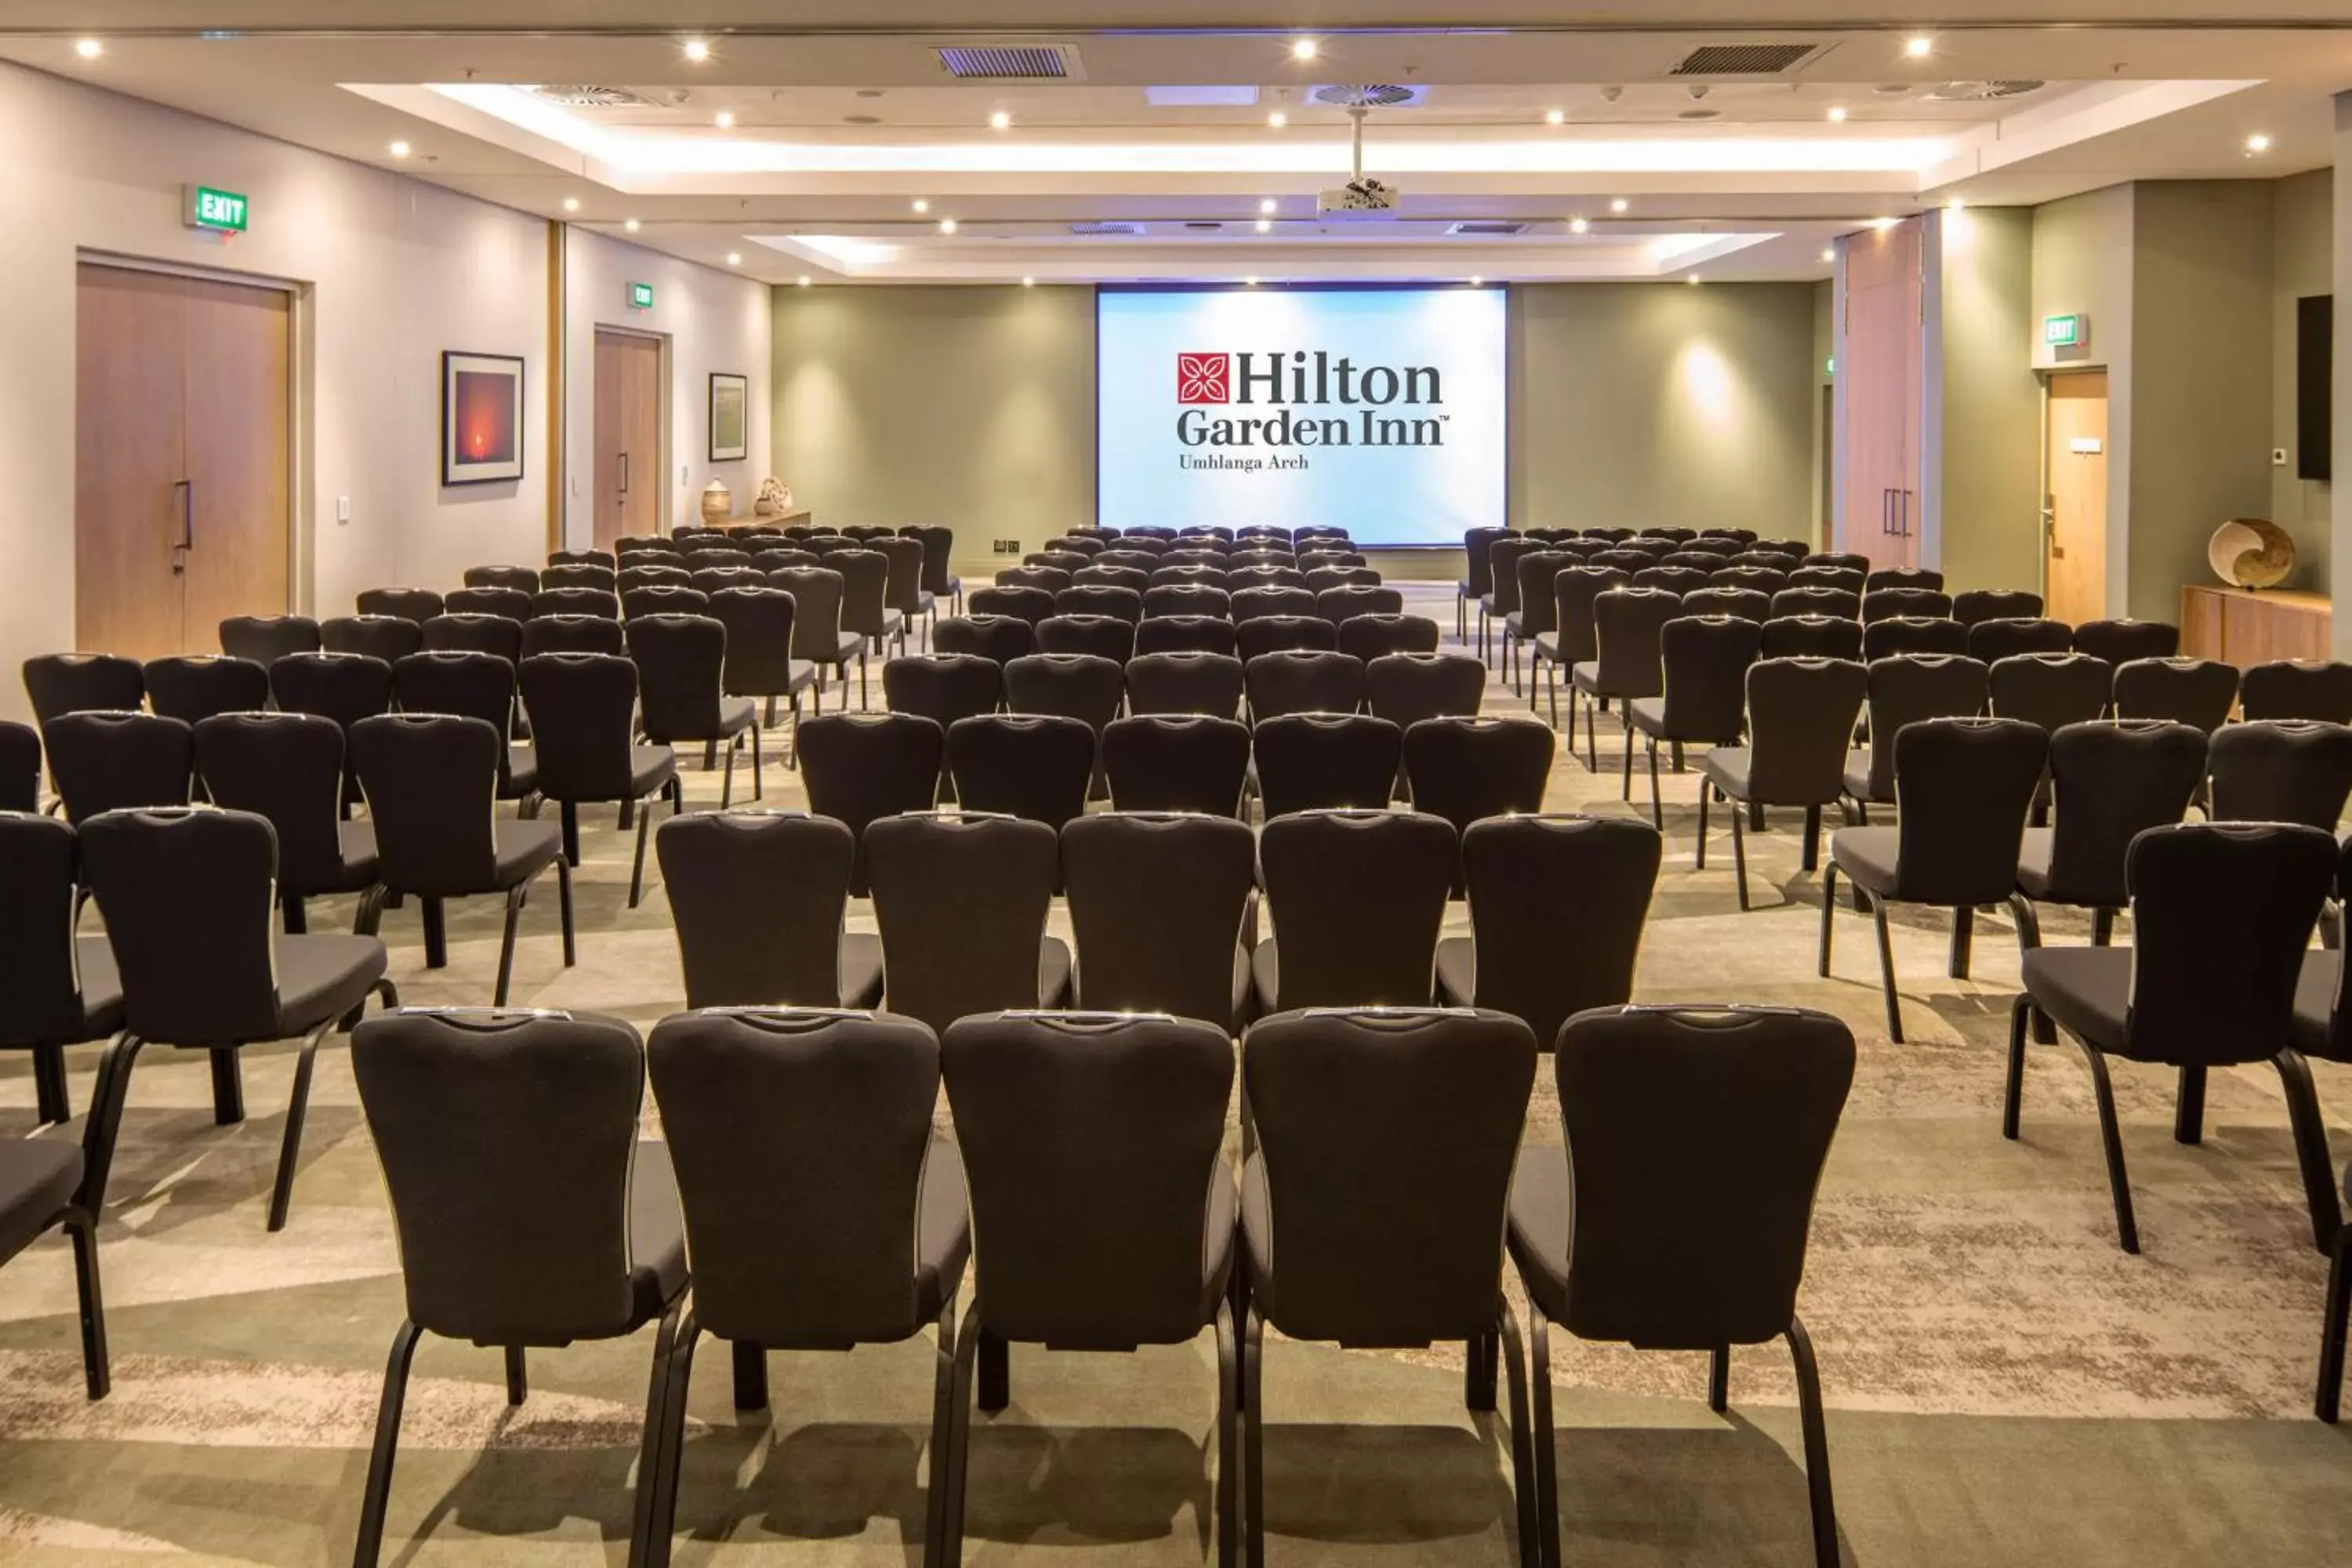 Meeting/conference room in Hilton Garden Inn Umhlanga Arch